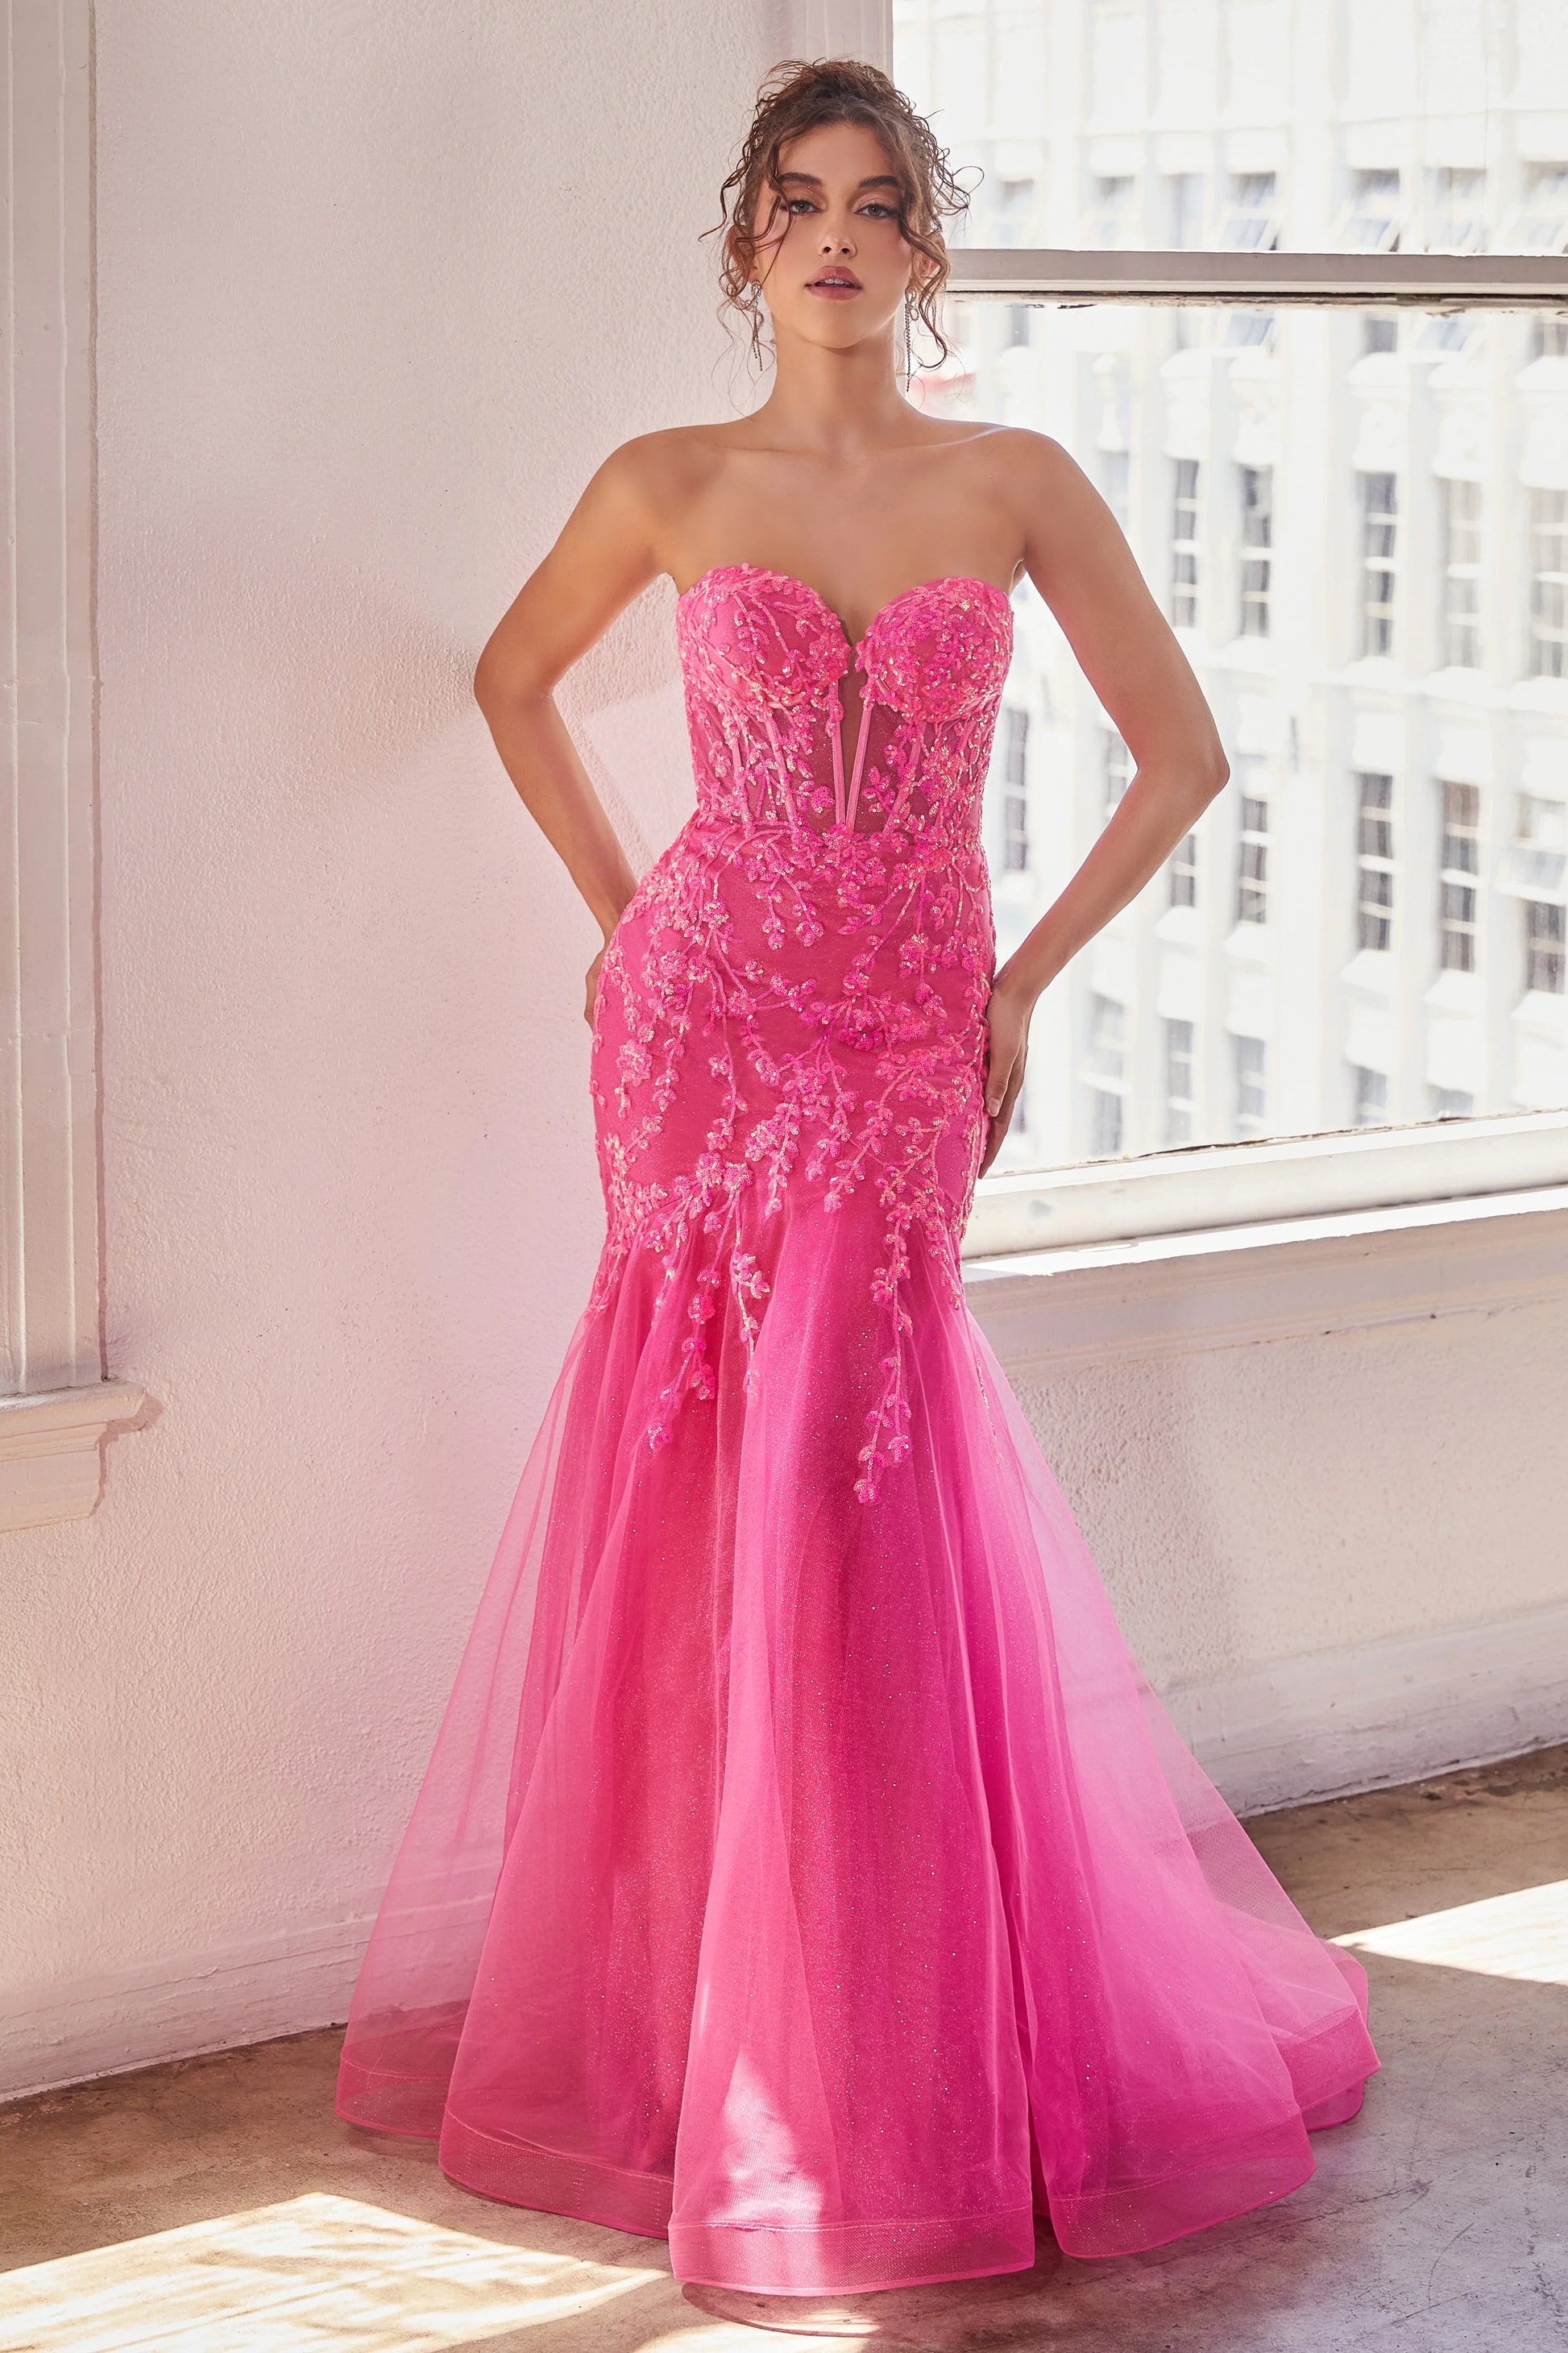 Ladivine CB139 Size 4 Hot Pink Sheer Corset Shimmer Mermaid Sequin Prom  Dress Strapless Formal Gown